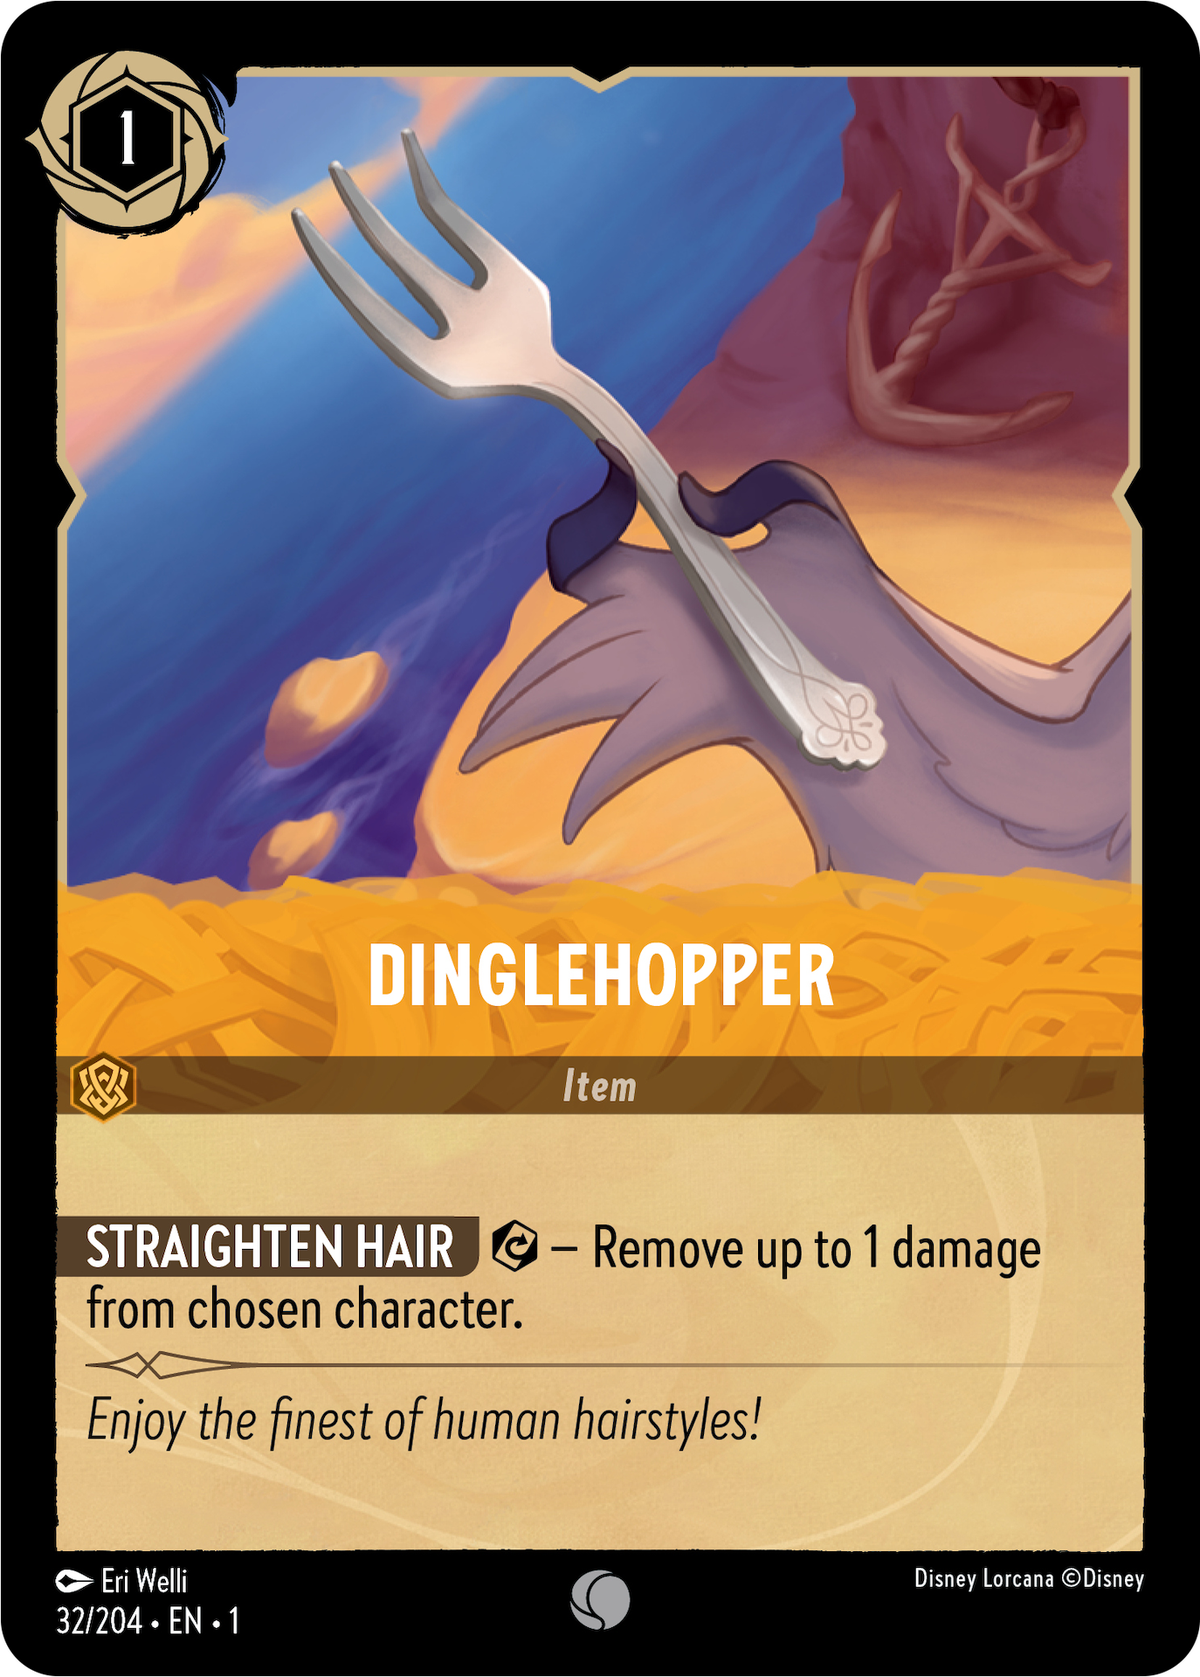 A seagull holding a fork. The dinglehopper card allows you to straighten your hair in Disney Lorcana, removing up to one damage.